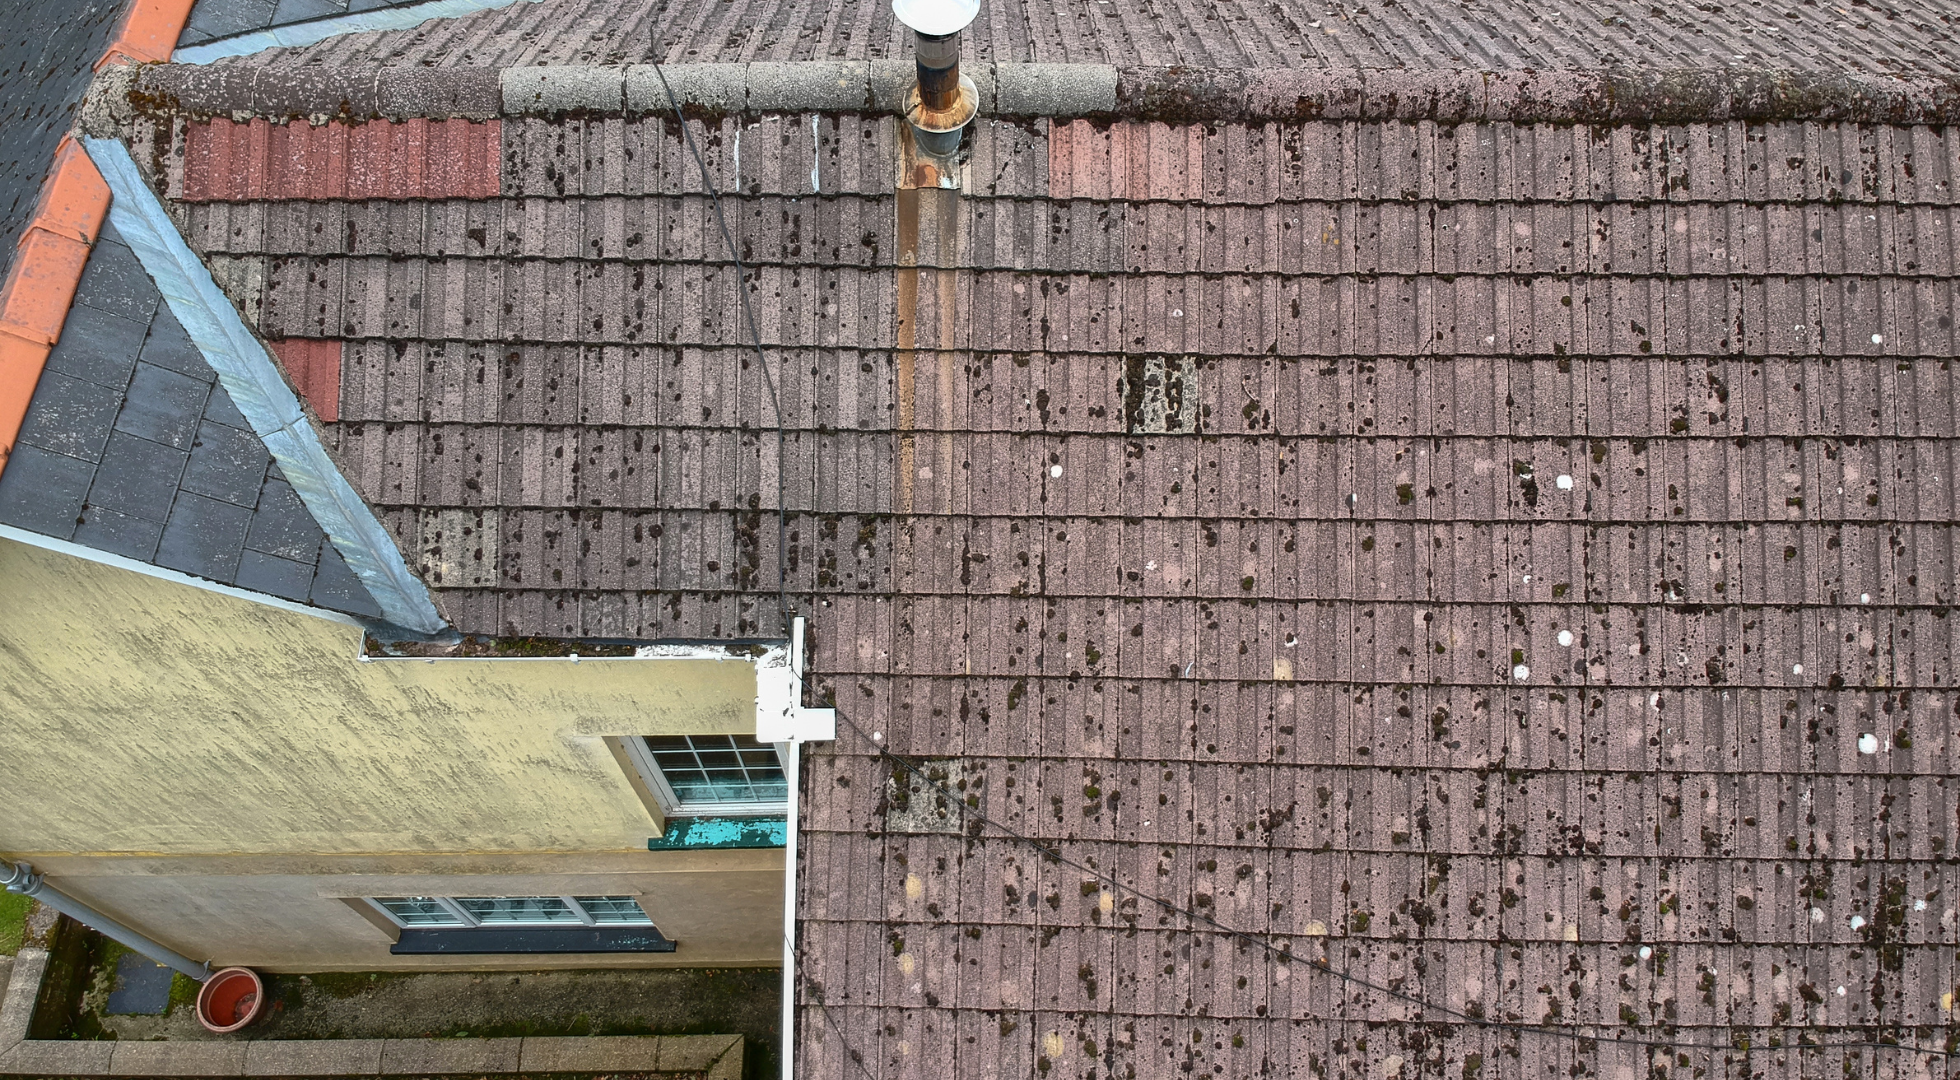 Drones offer an accurate method of roof inspection.